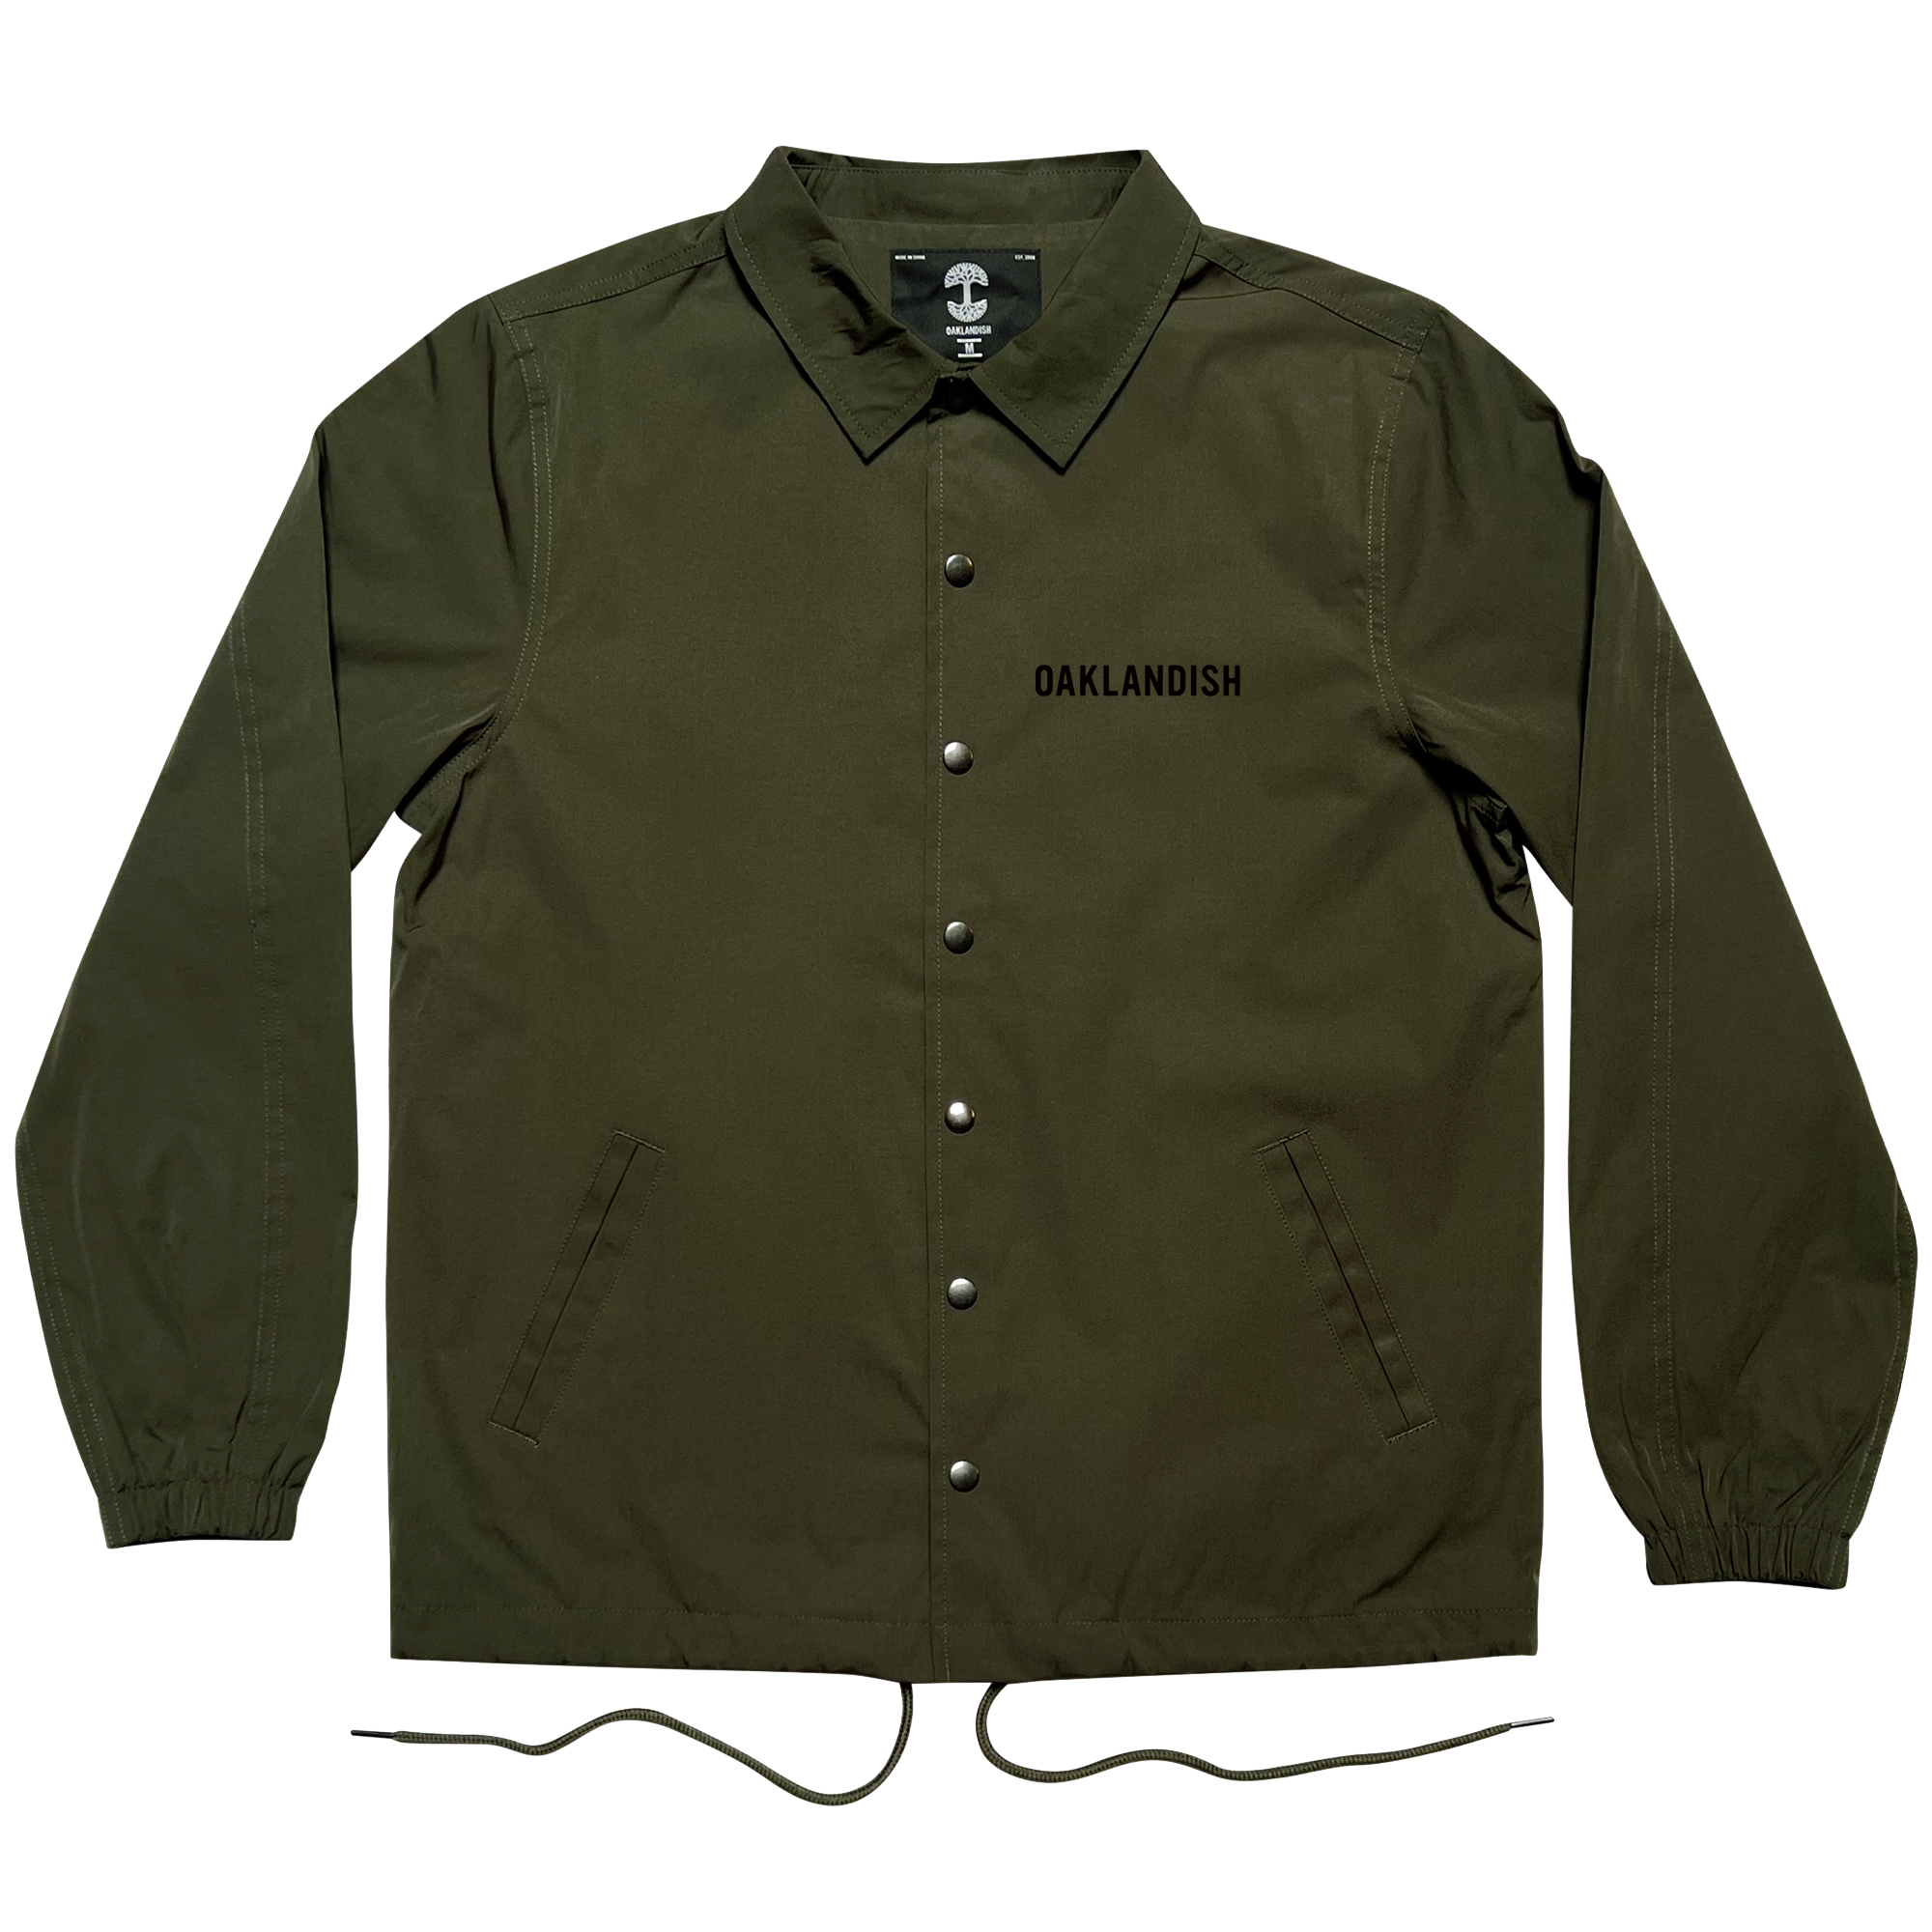 Olive green snap close coaches jacket with 'Oaklandish' wordmark on the wearer's left chest, with a collar and drawstring waist.